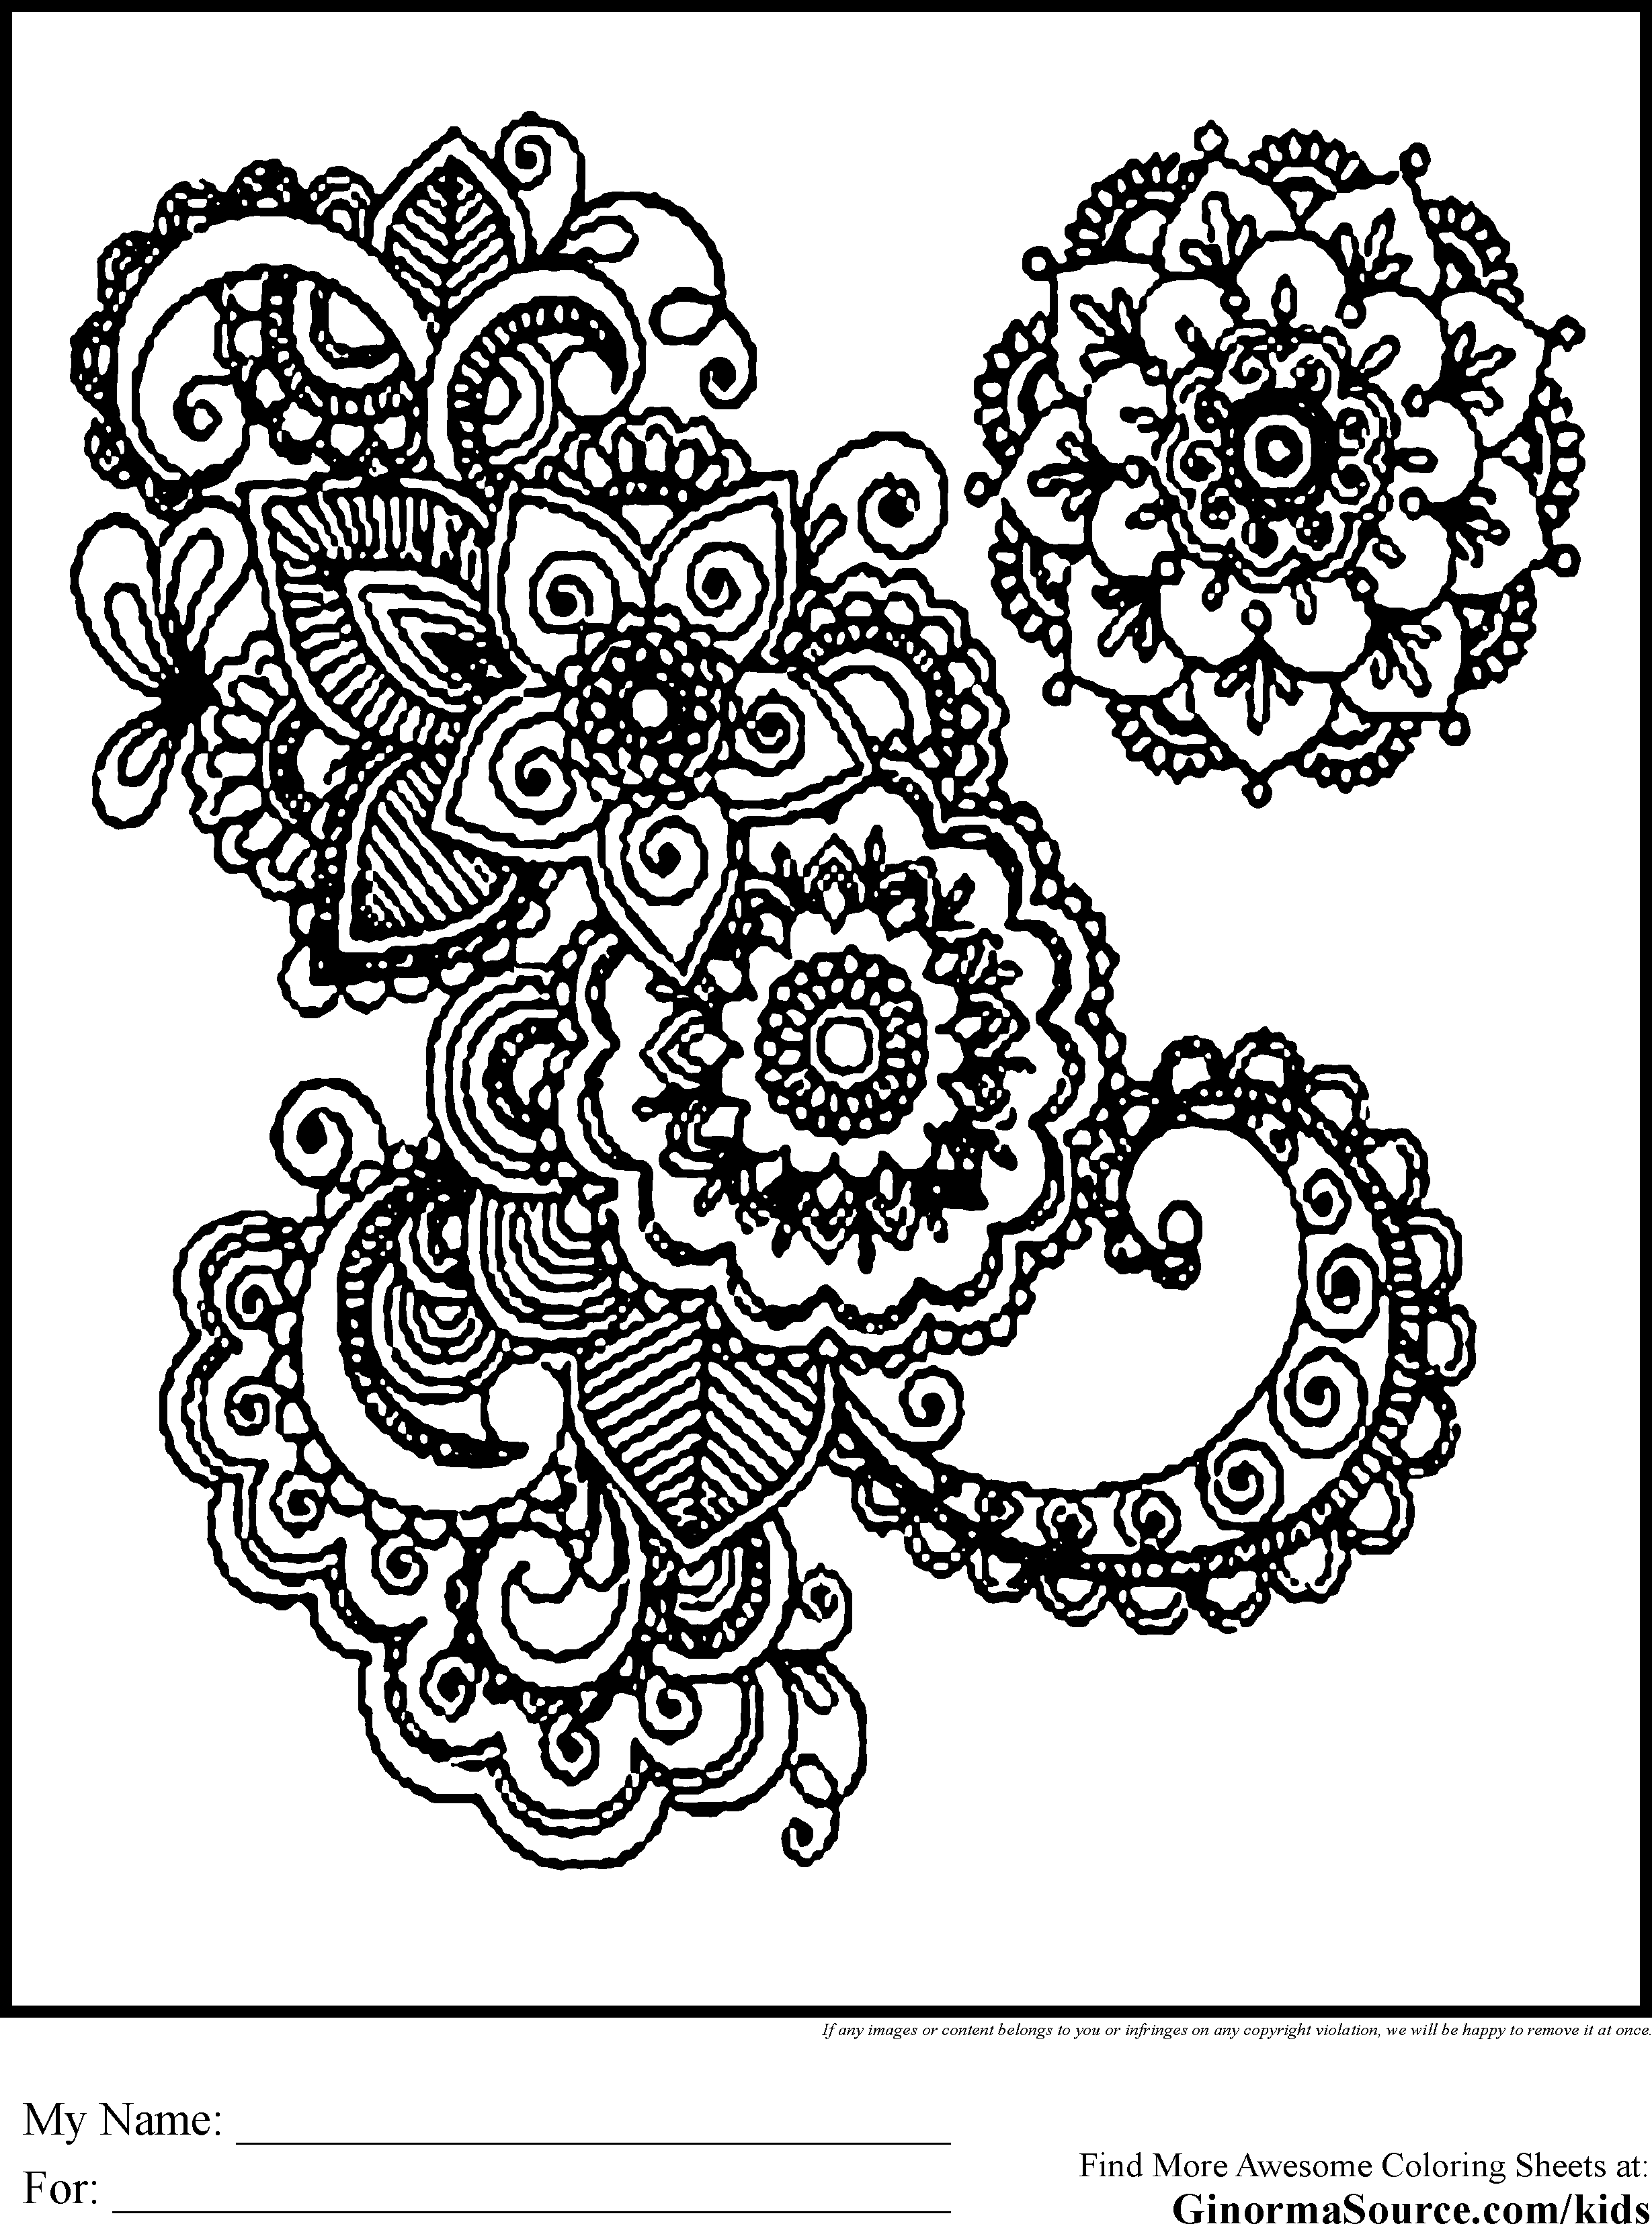 Full Page Coloring Sheets For Kids - Coloring